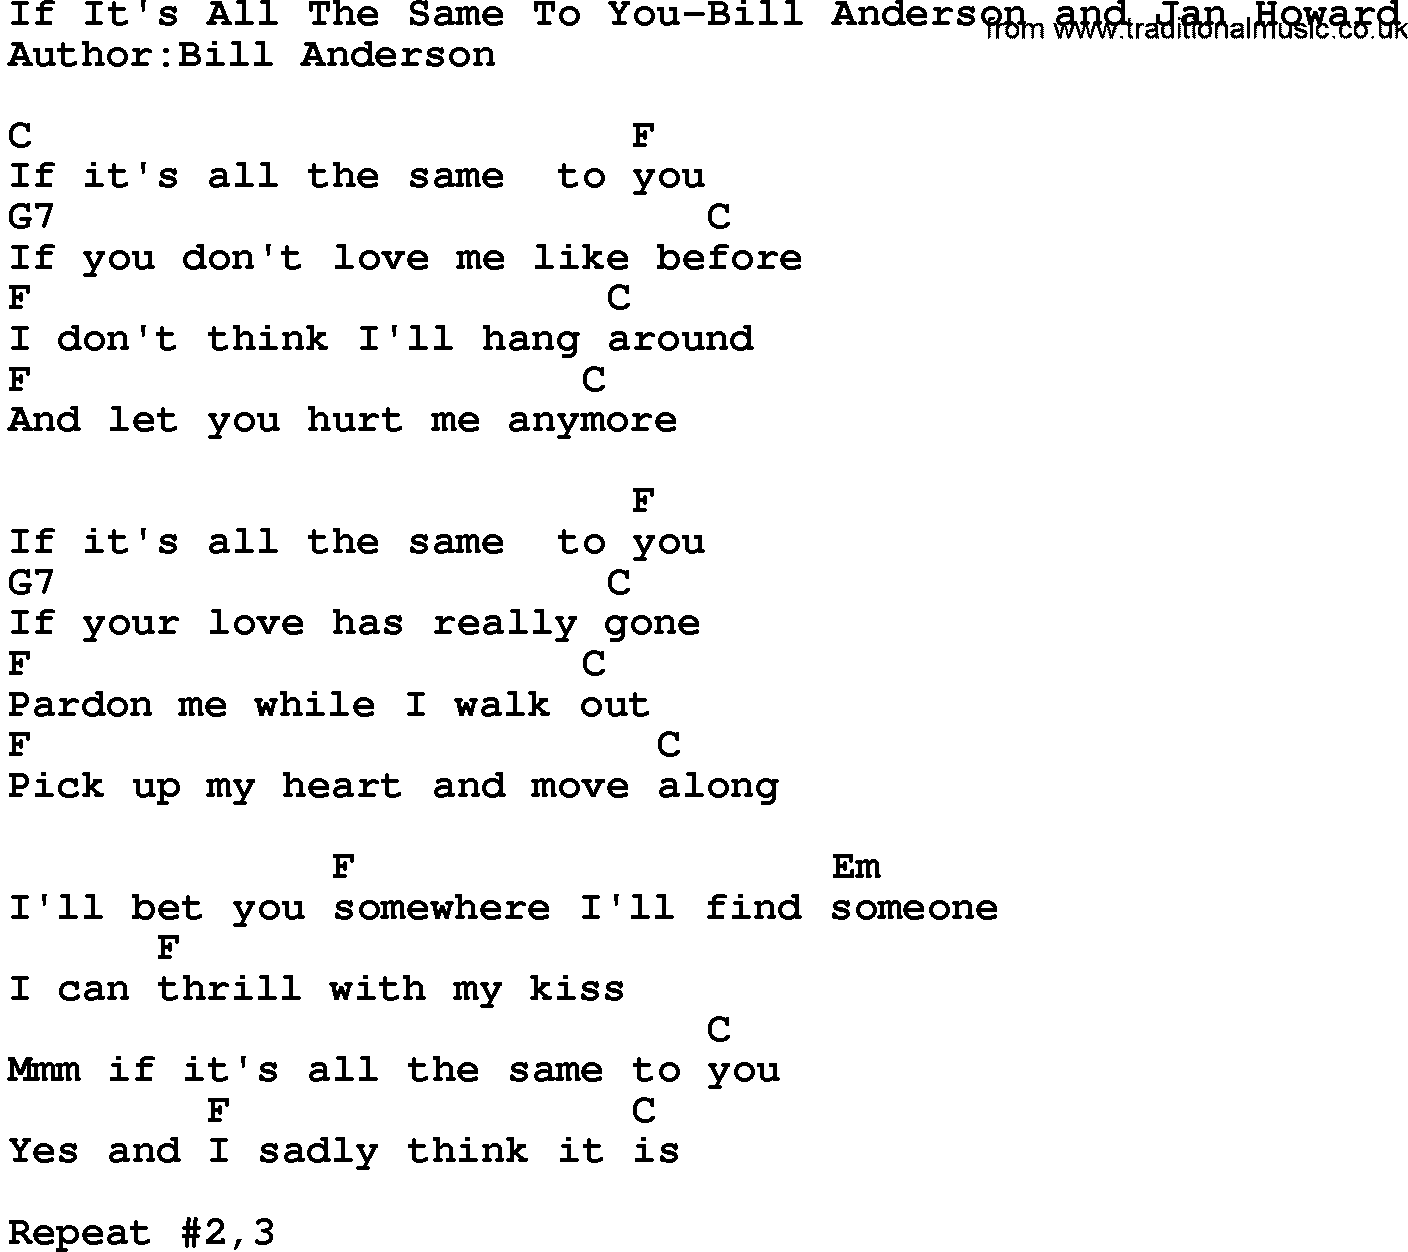 Country music song: If It's All The Same To You-Bill Anderson And Jan Howard lyrics and chords